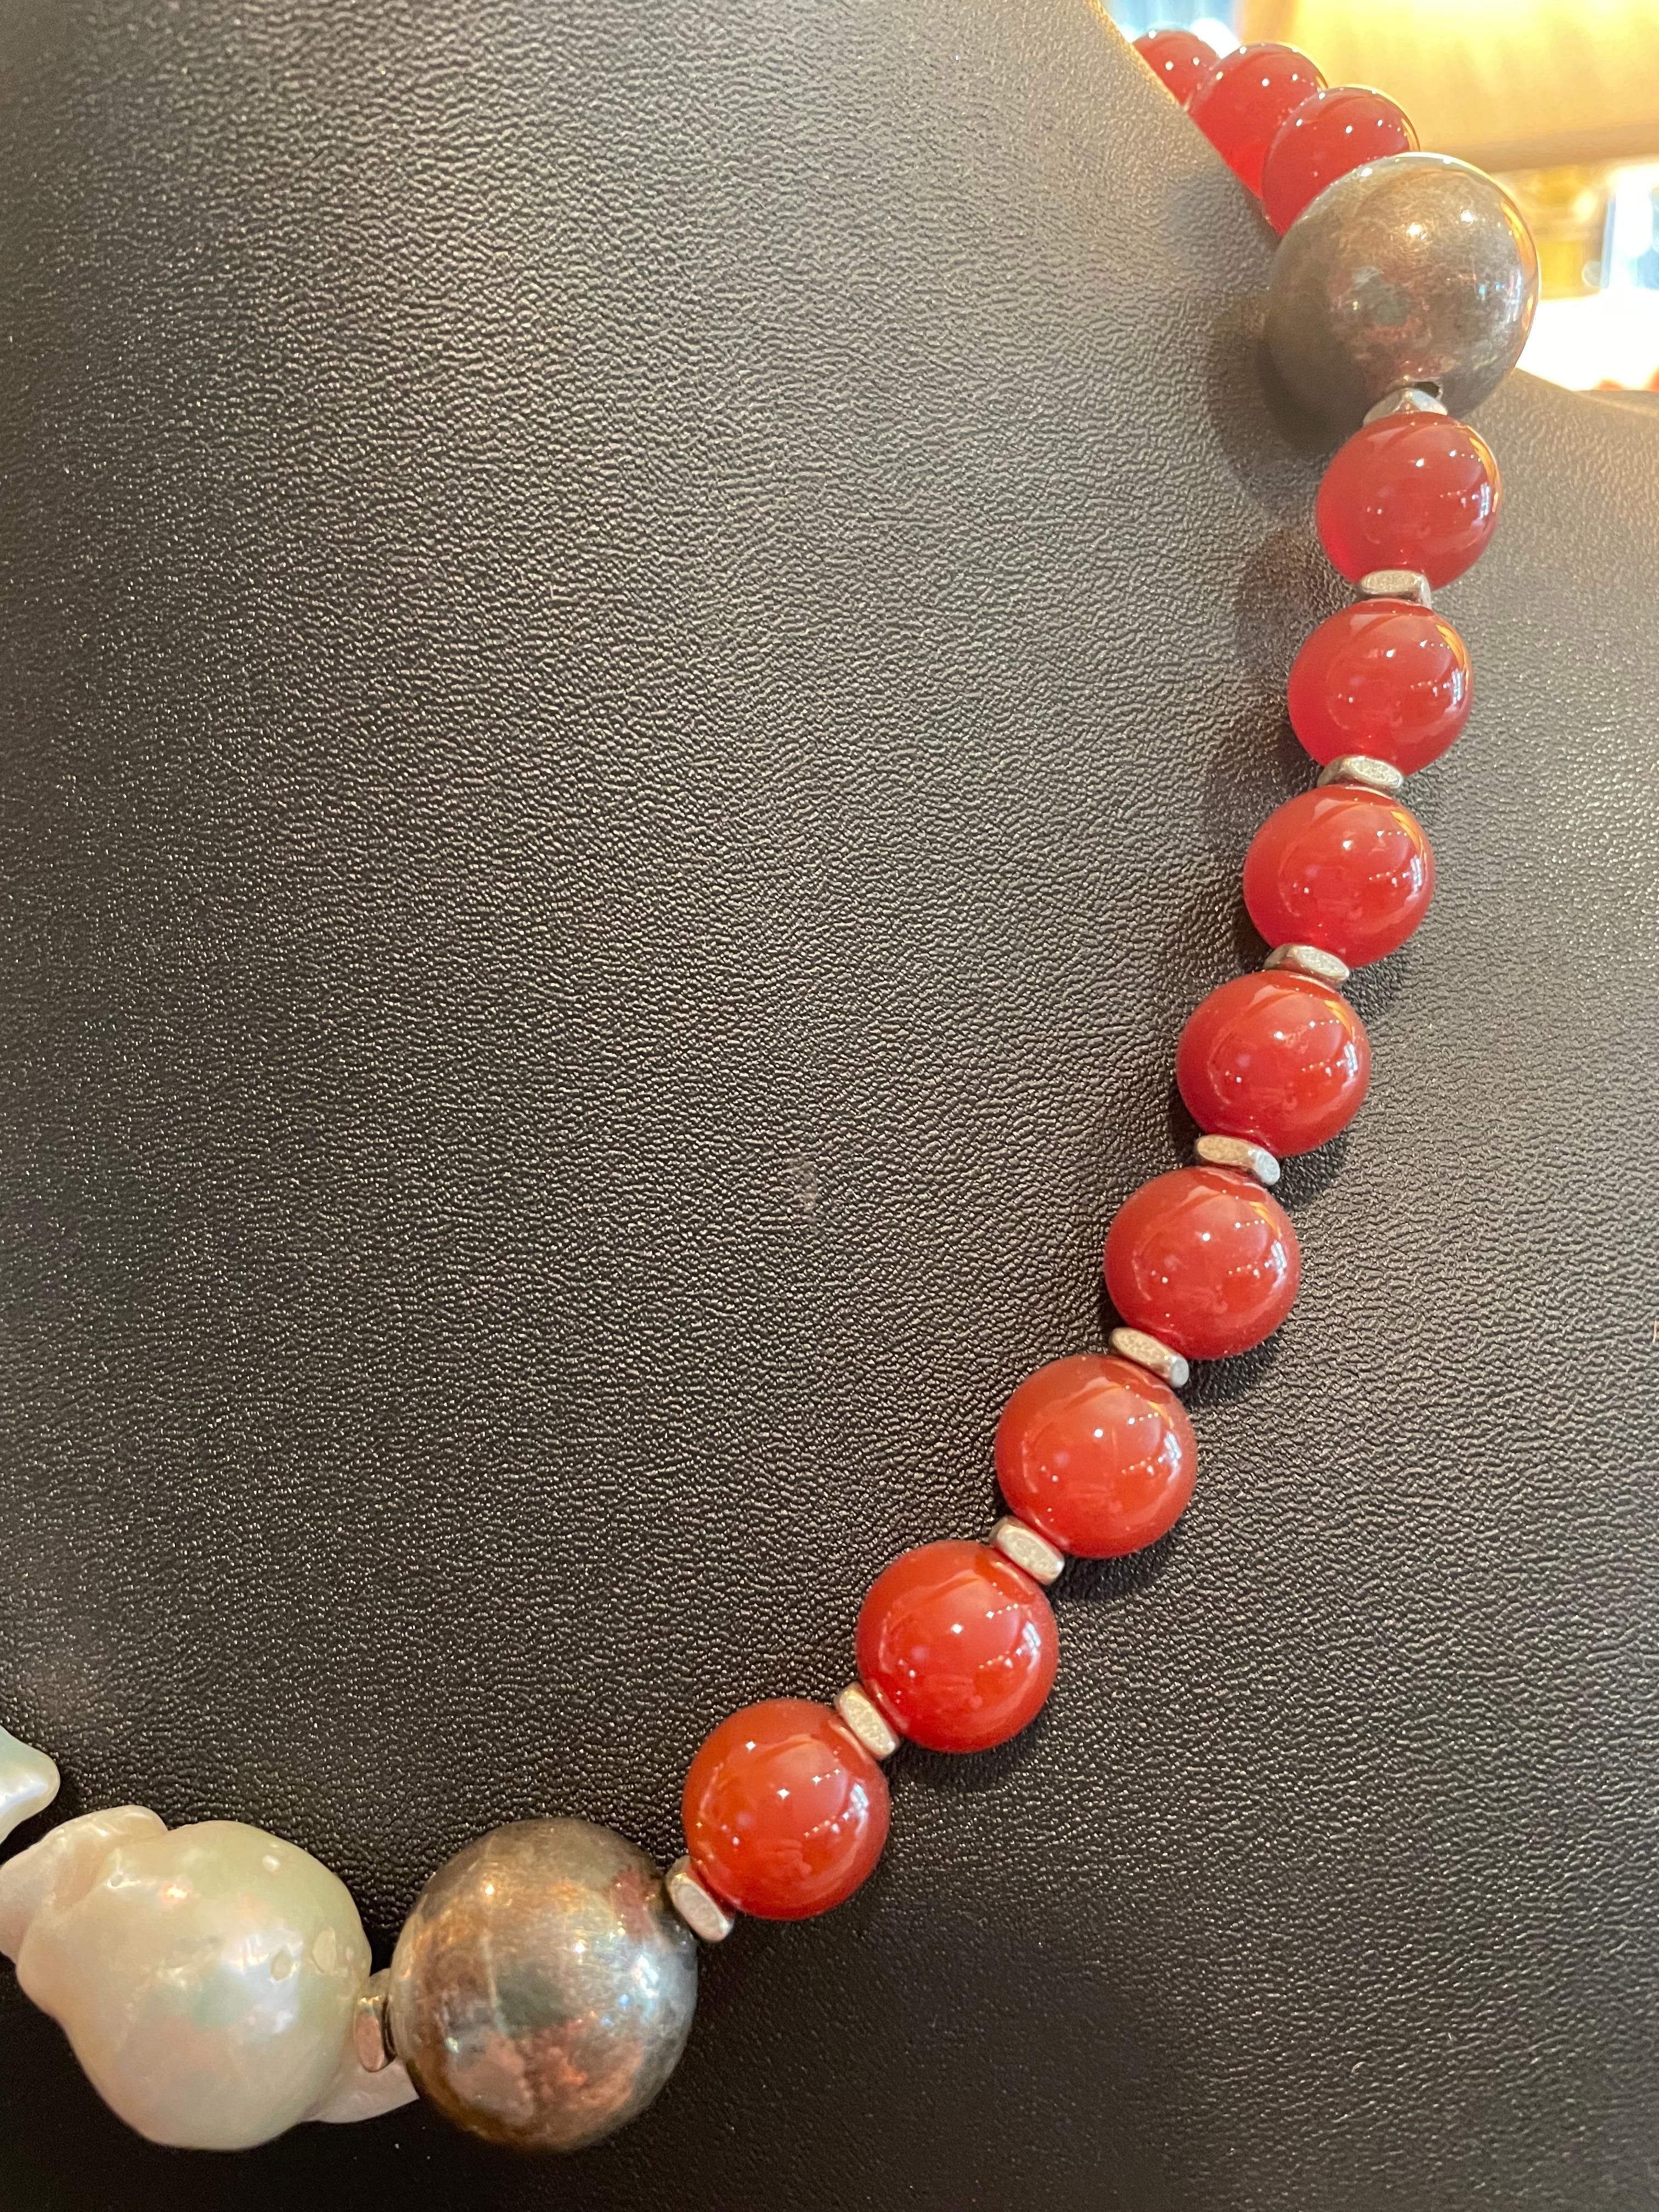 LB  offers large round Carnelian  beads and Large Chinese Baroque Pearls and Sterling Silver, handmade,one of a kind necklace.Large sterling silver Vintage Mexican beads are a great counterpoint to the pearls and the wonderful orange carnelian.